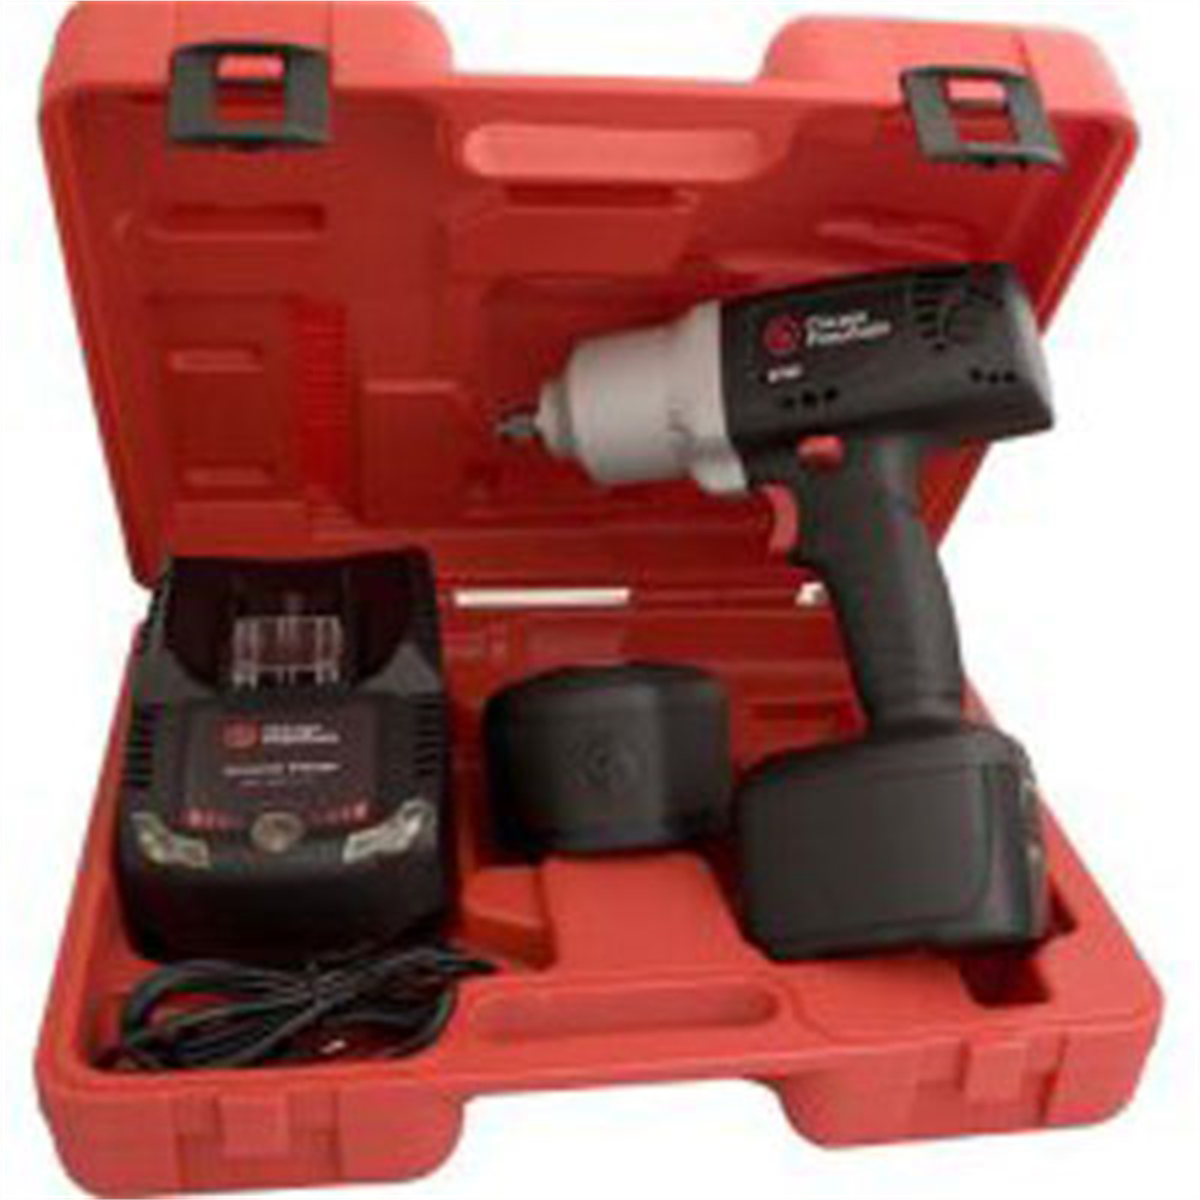 z-disc. 1/2 In Cordless Impact Wrench w/ 2 Ni-Cd Batteries